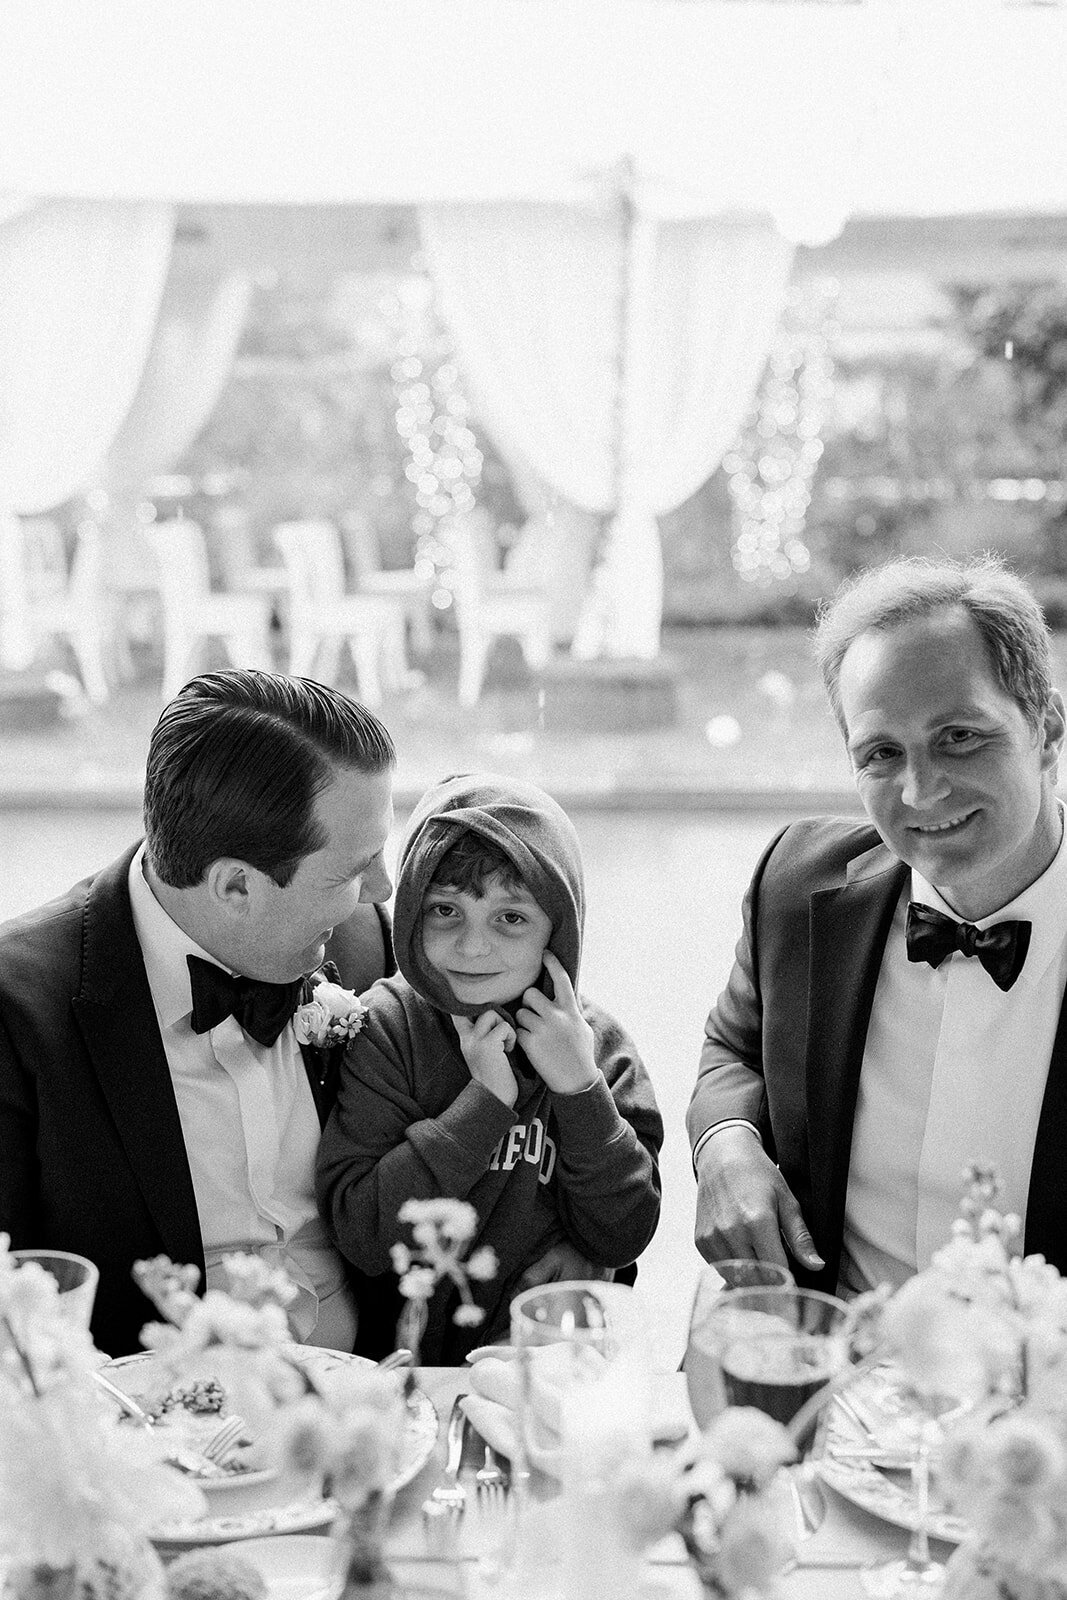 Groom With Children in Tuxedos